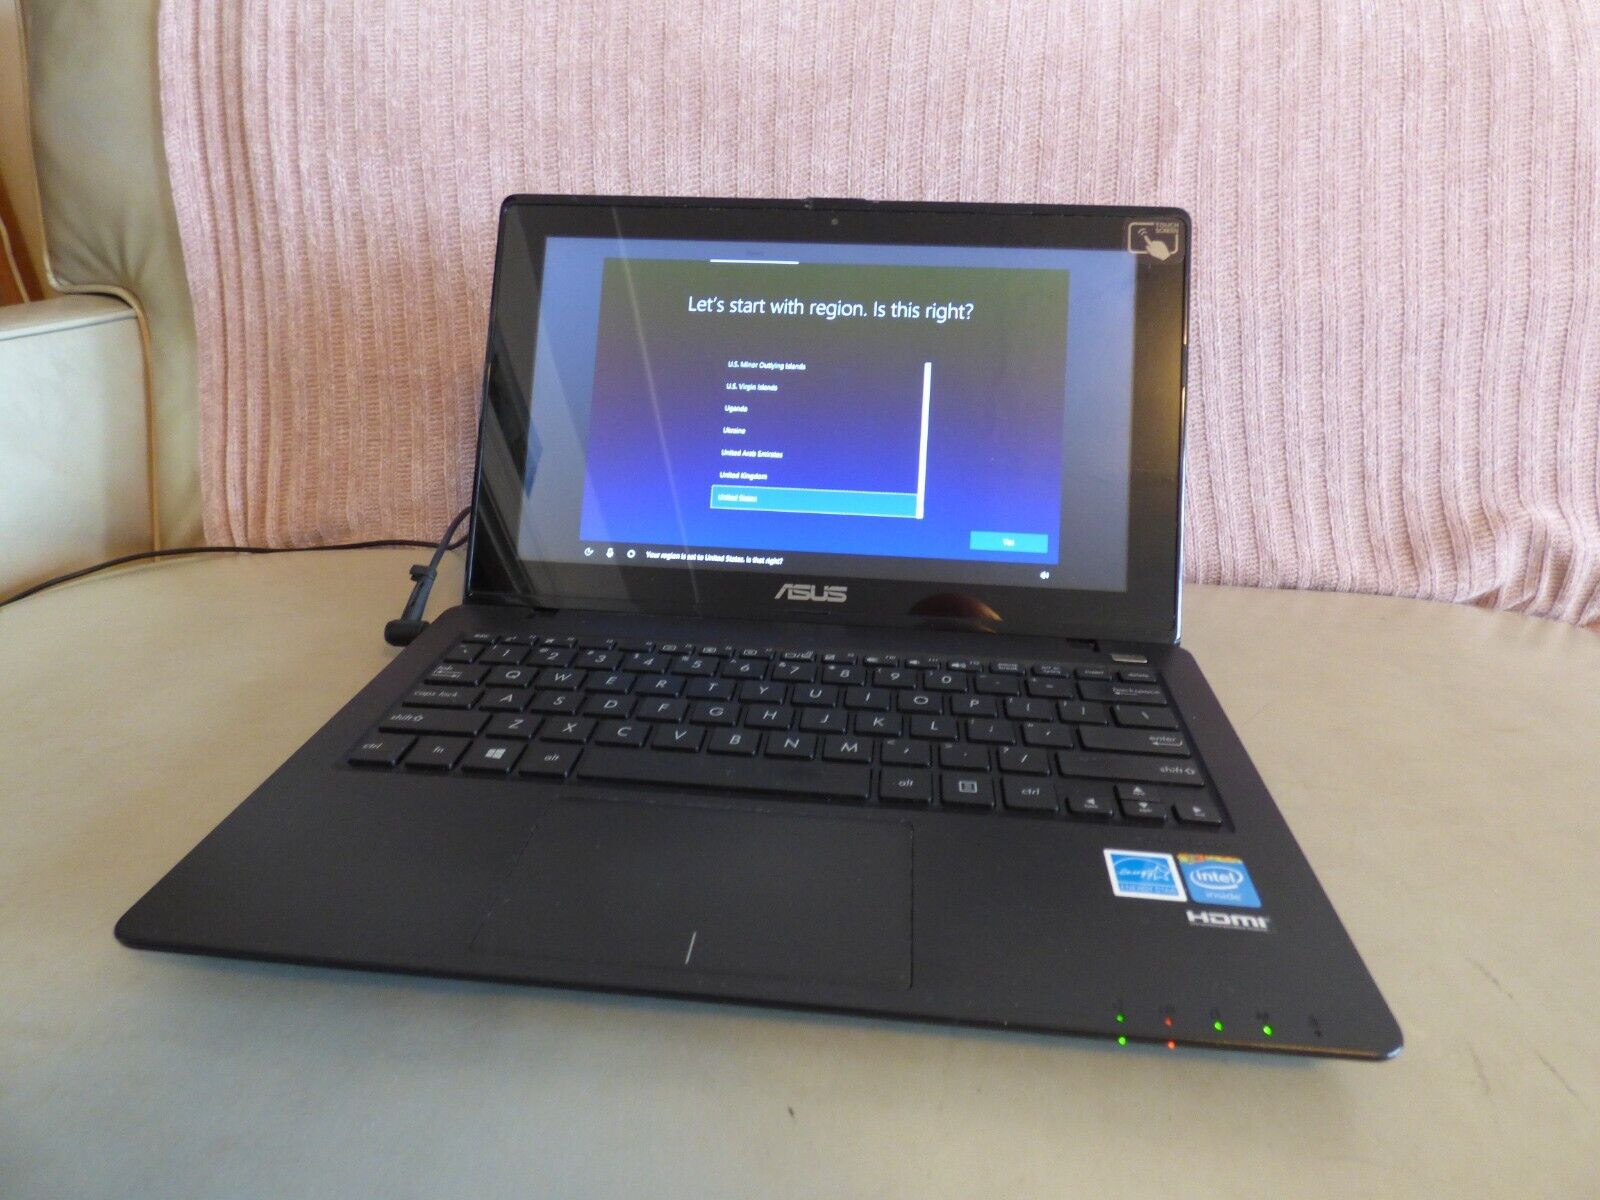 Asus X200M Notebook PC from E-Waste Nice No Charger Bad Battery